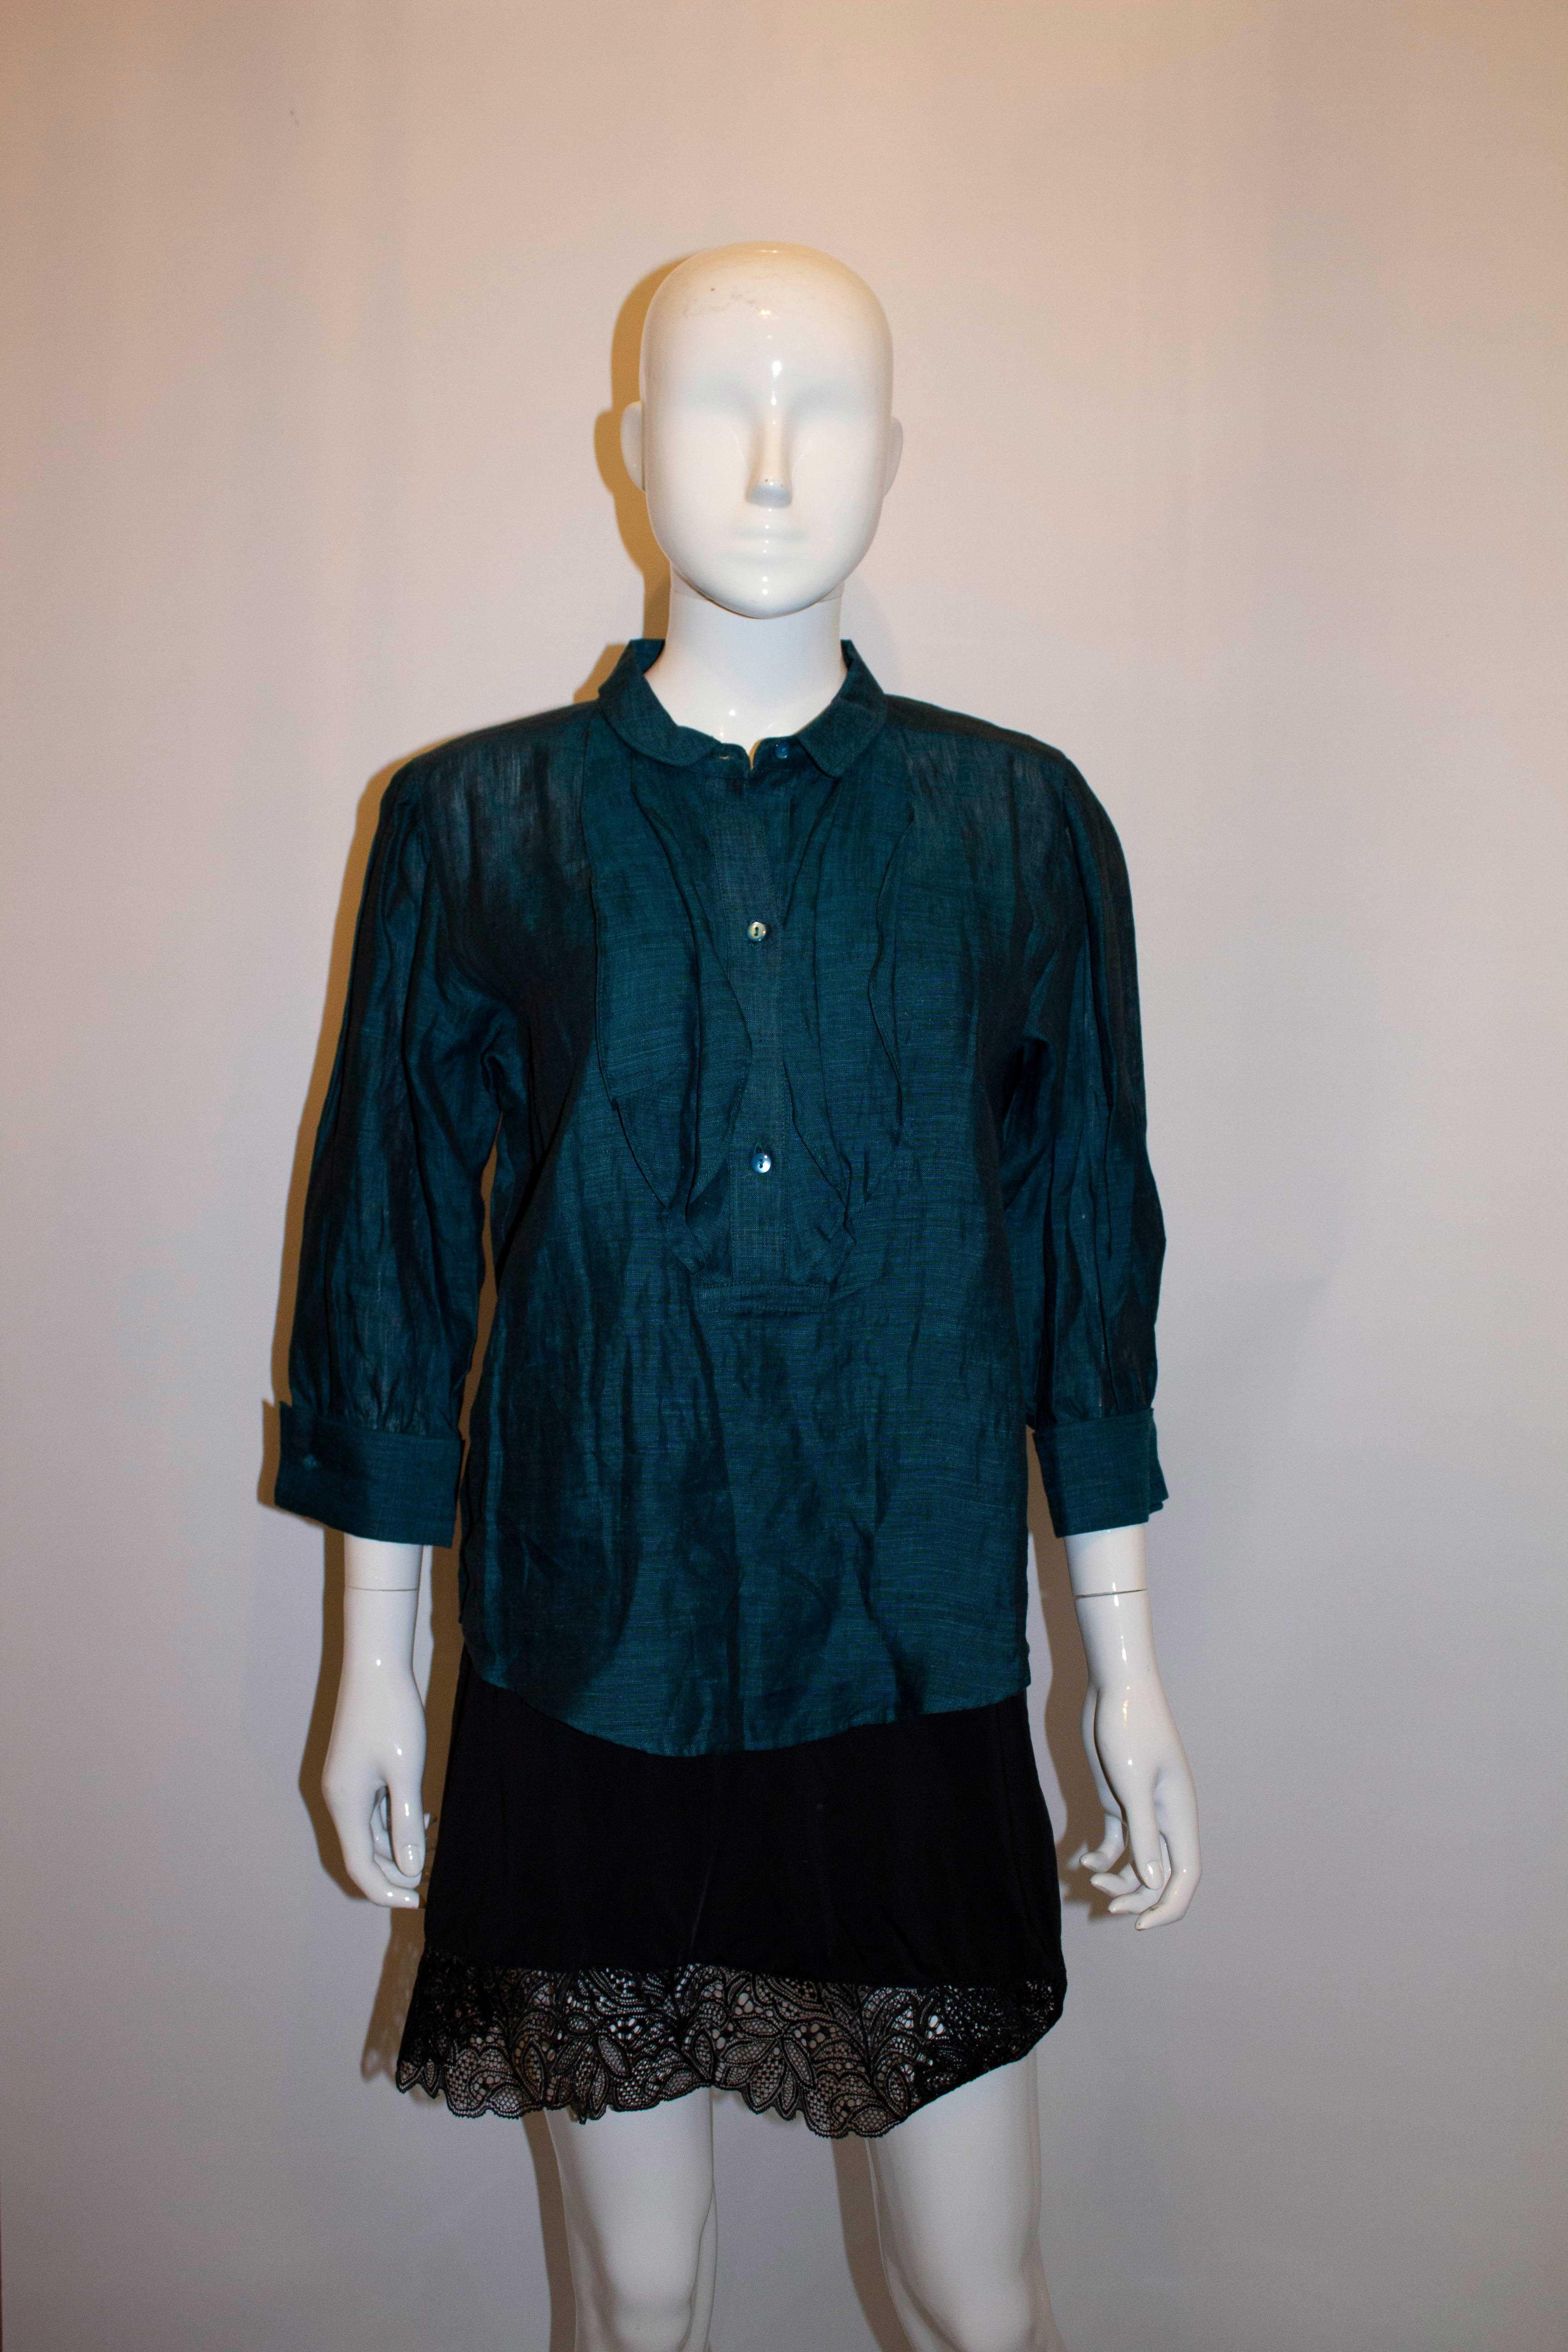 Vintage Kenzo Frill Shirt In Good Condition For Sale In London, GB